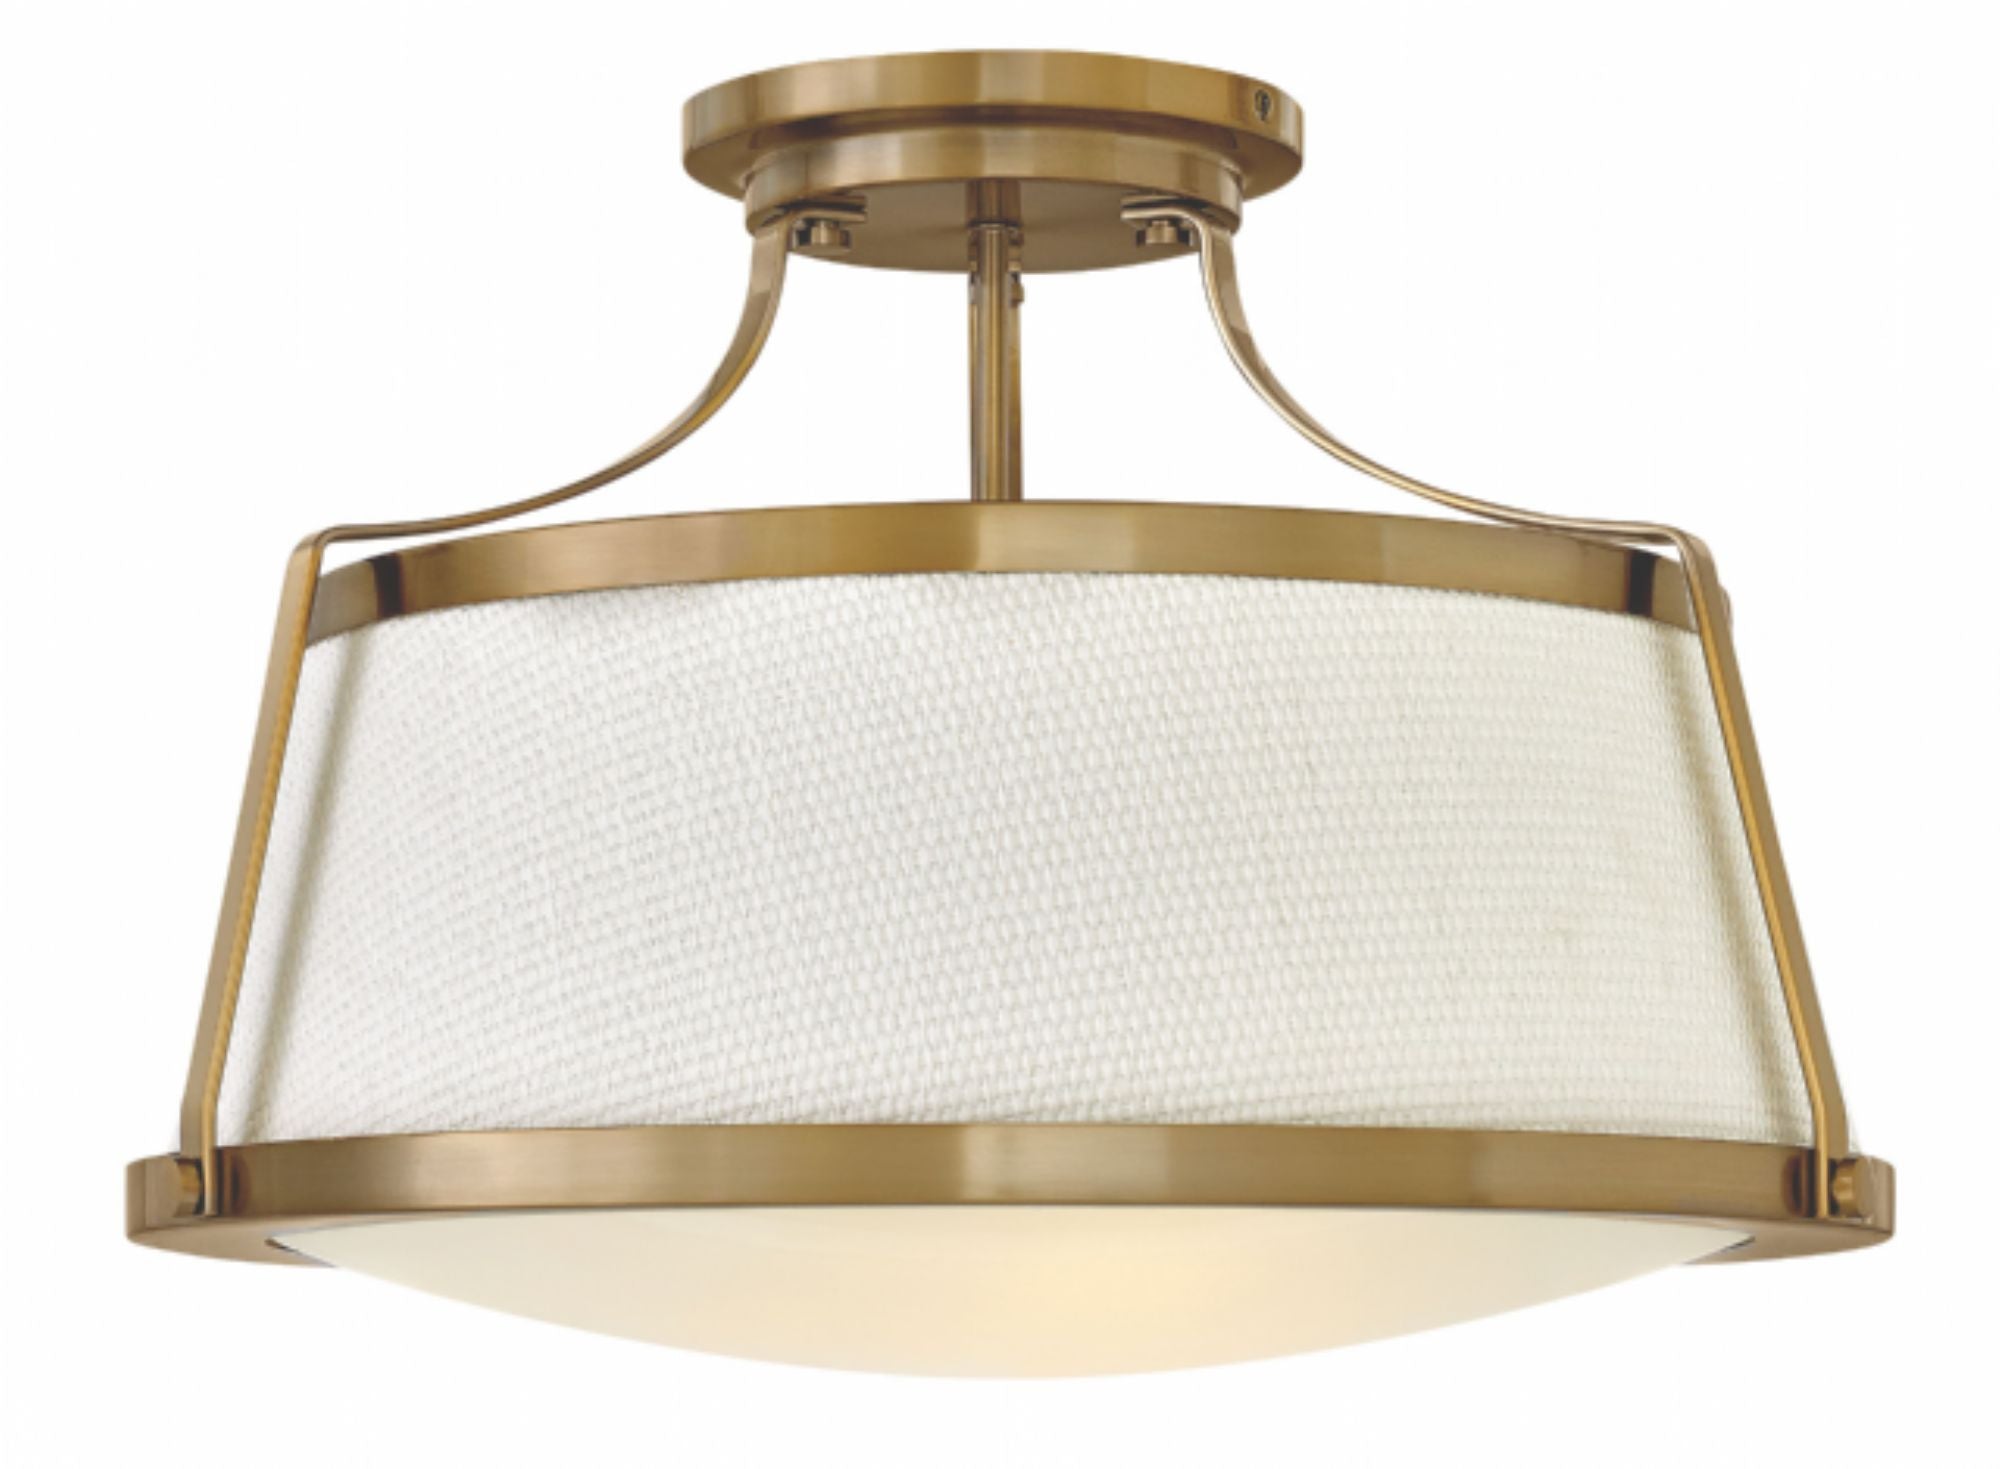 Charlotte 3 Light Semi Flush in Brushed Caramel with Woven Off-White Fabric Shade by Hinkley Lighting 3522BC